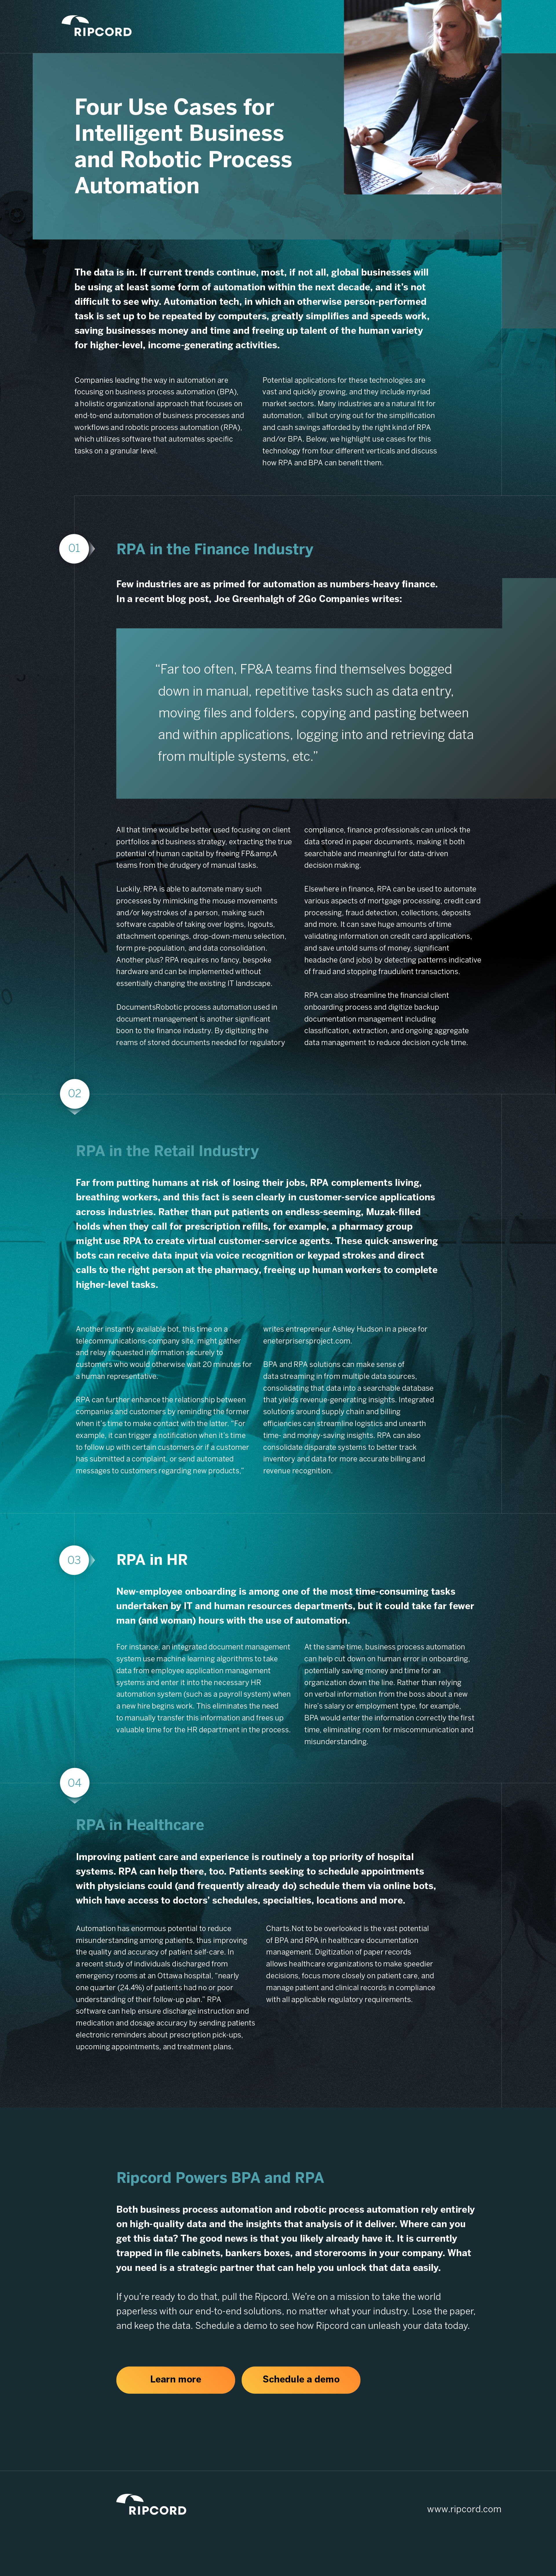 Four Use Cases for Intelligent Business and Robotic Process Automation Infographic - Ripcord